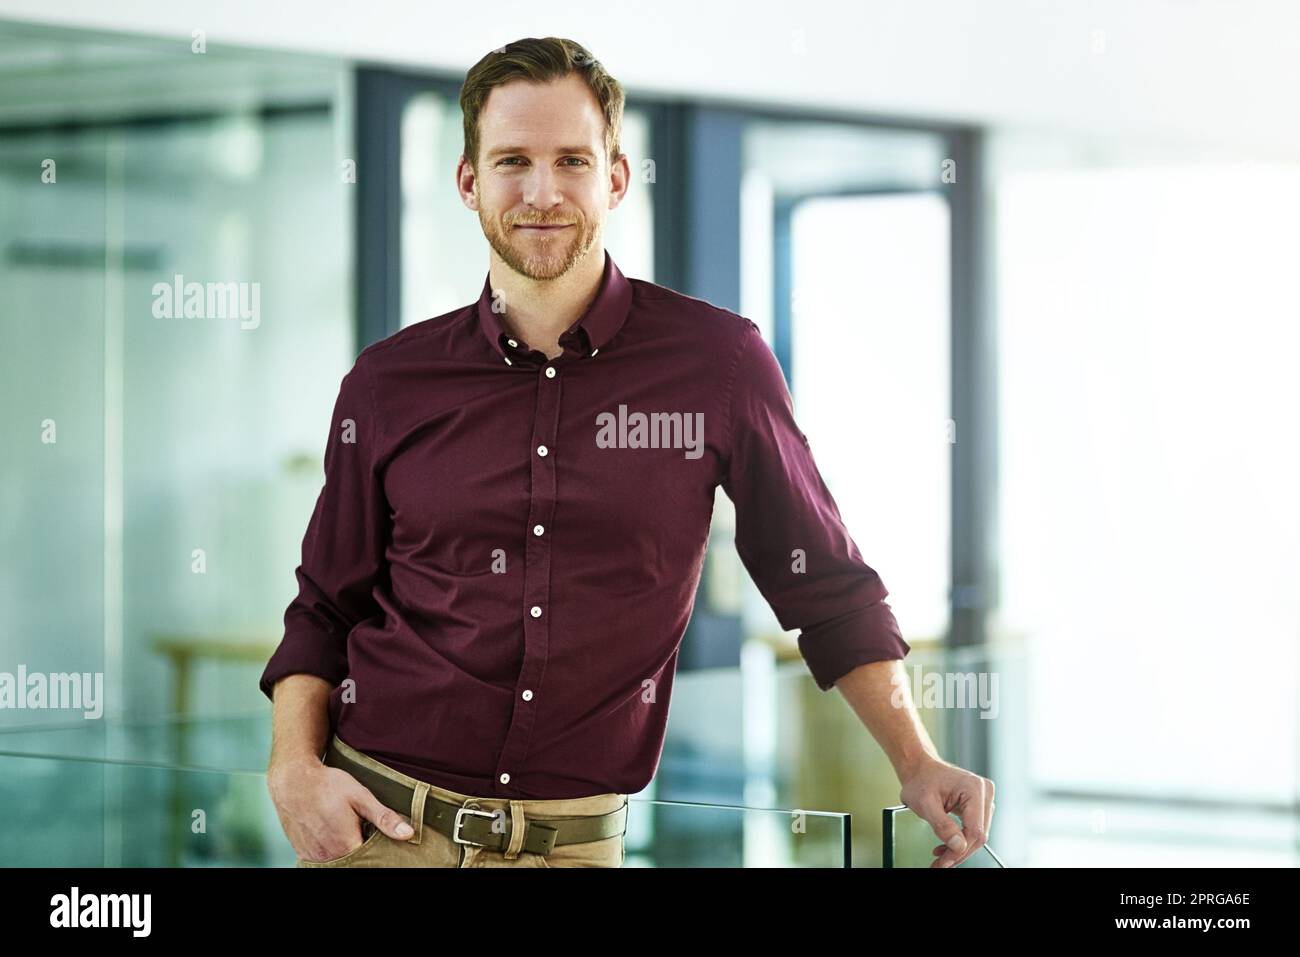 Im a leader who walks the talk. Portrait of a young businessman posing in an office. Stock Photo